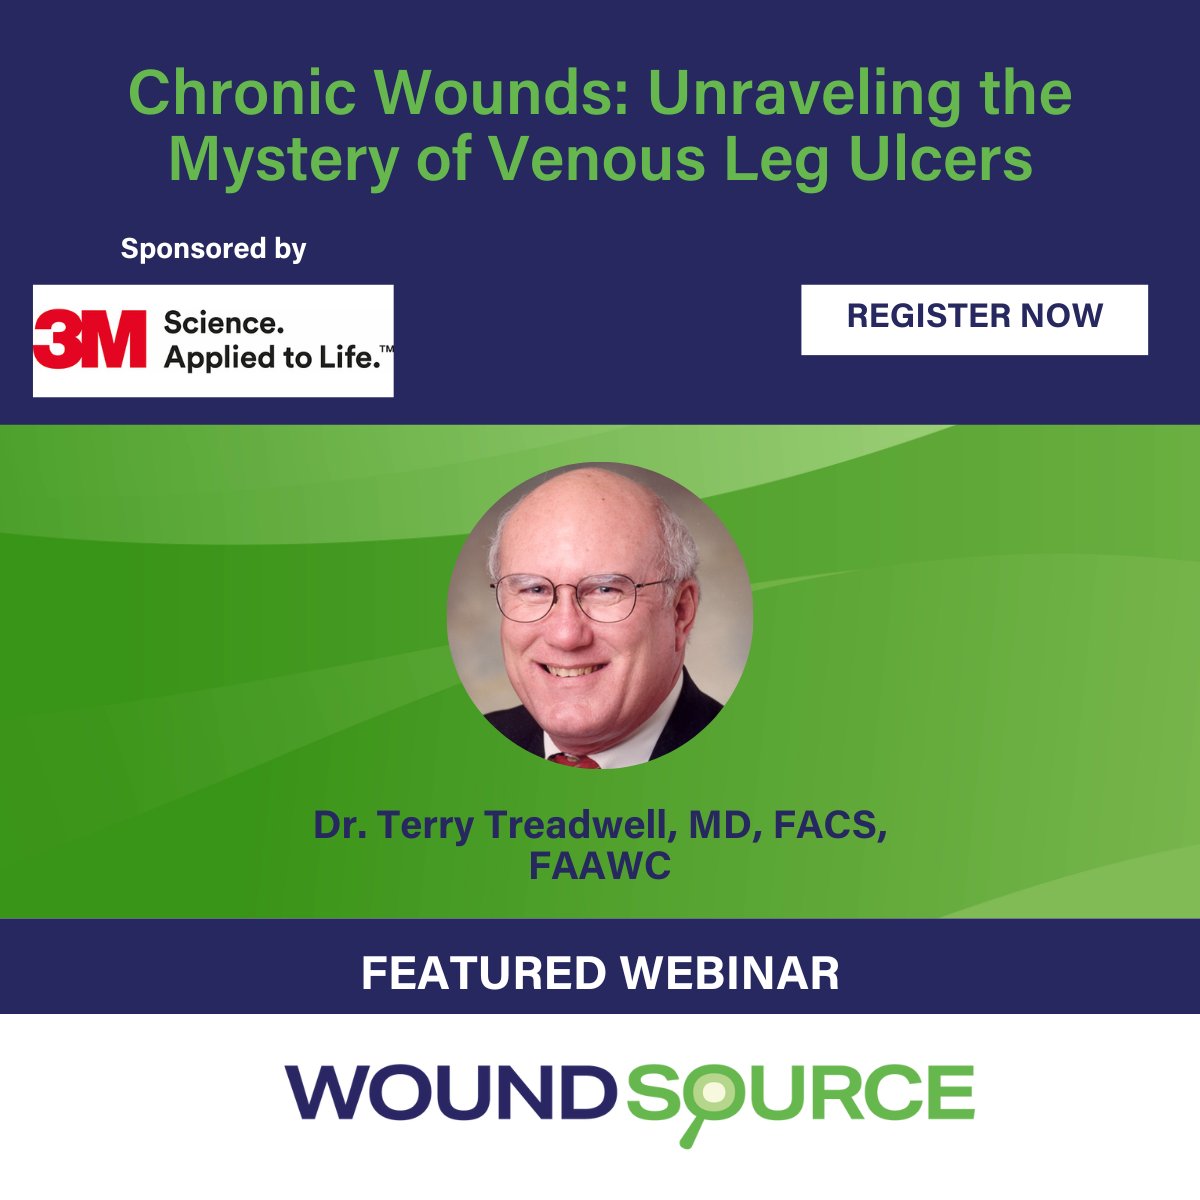 Have you registered for this upcoming webinar? Click below for more information.
Thursday, May 9, 2024 | 12:00 - 12:30pm ET
okt.to/VE0yB5
#woundhealing #VLU #legulcers #webinar